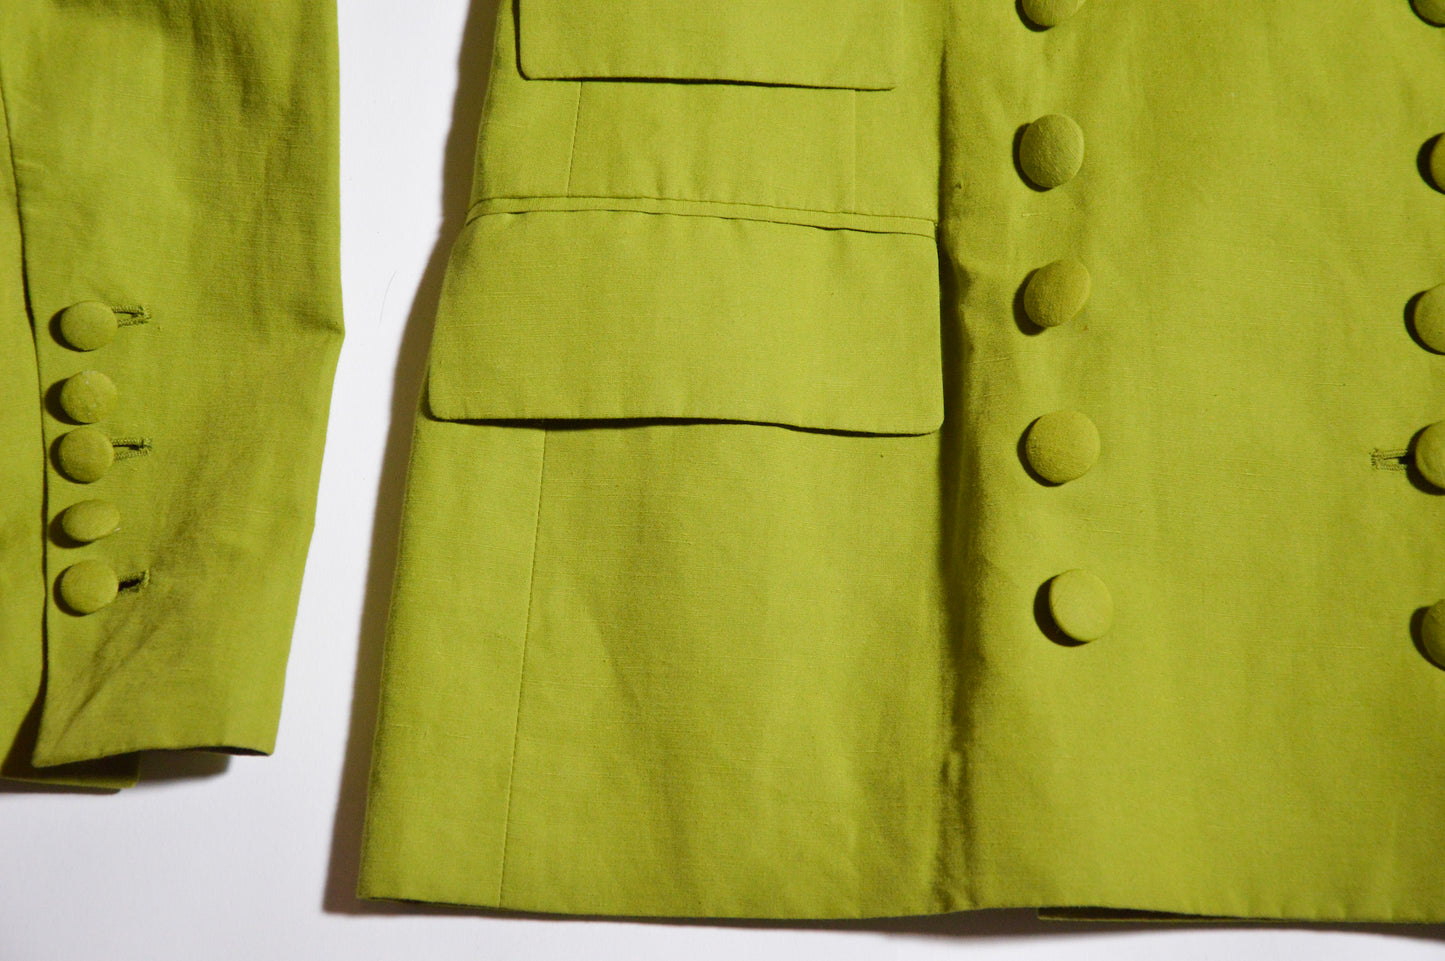 Jean Paul Gaultier - Lime Green Double Breasted Jacket